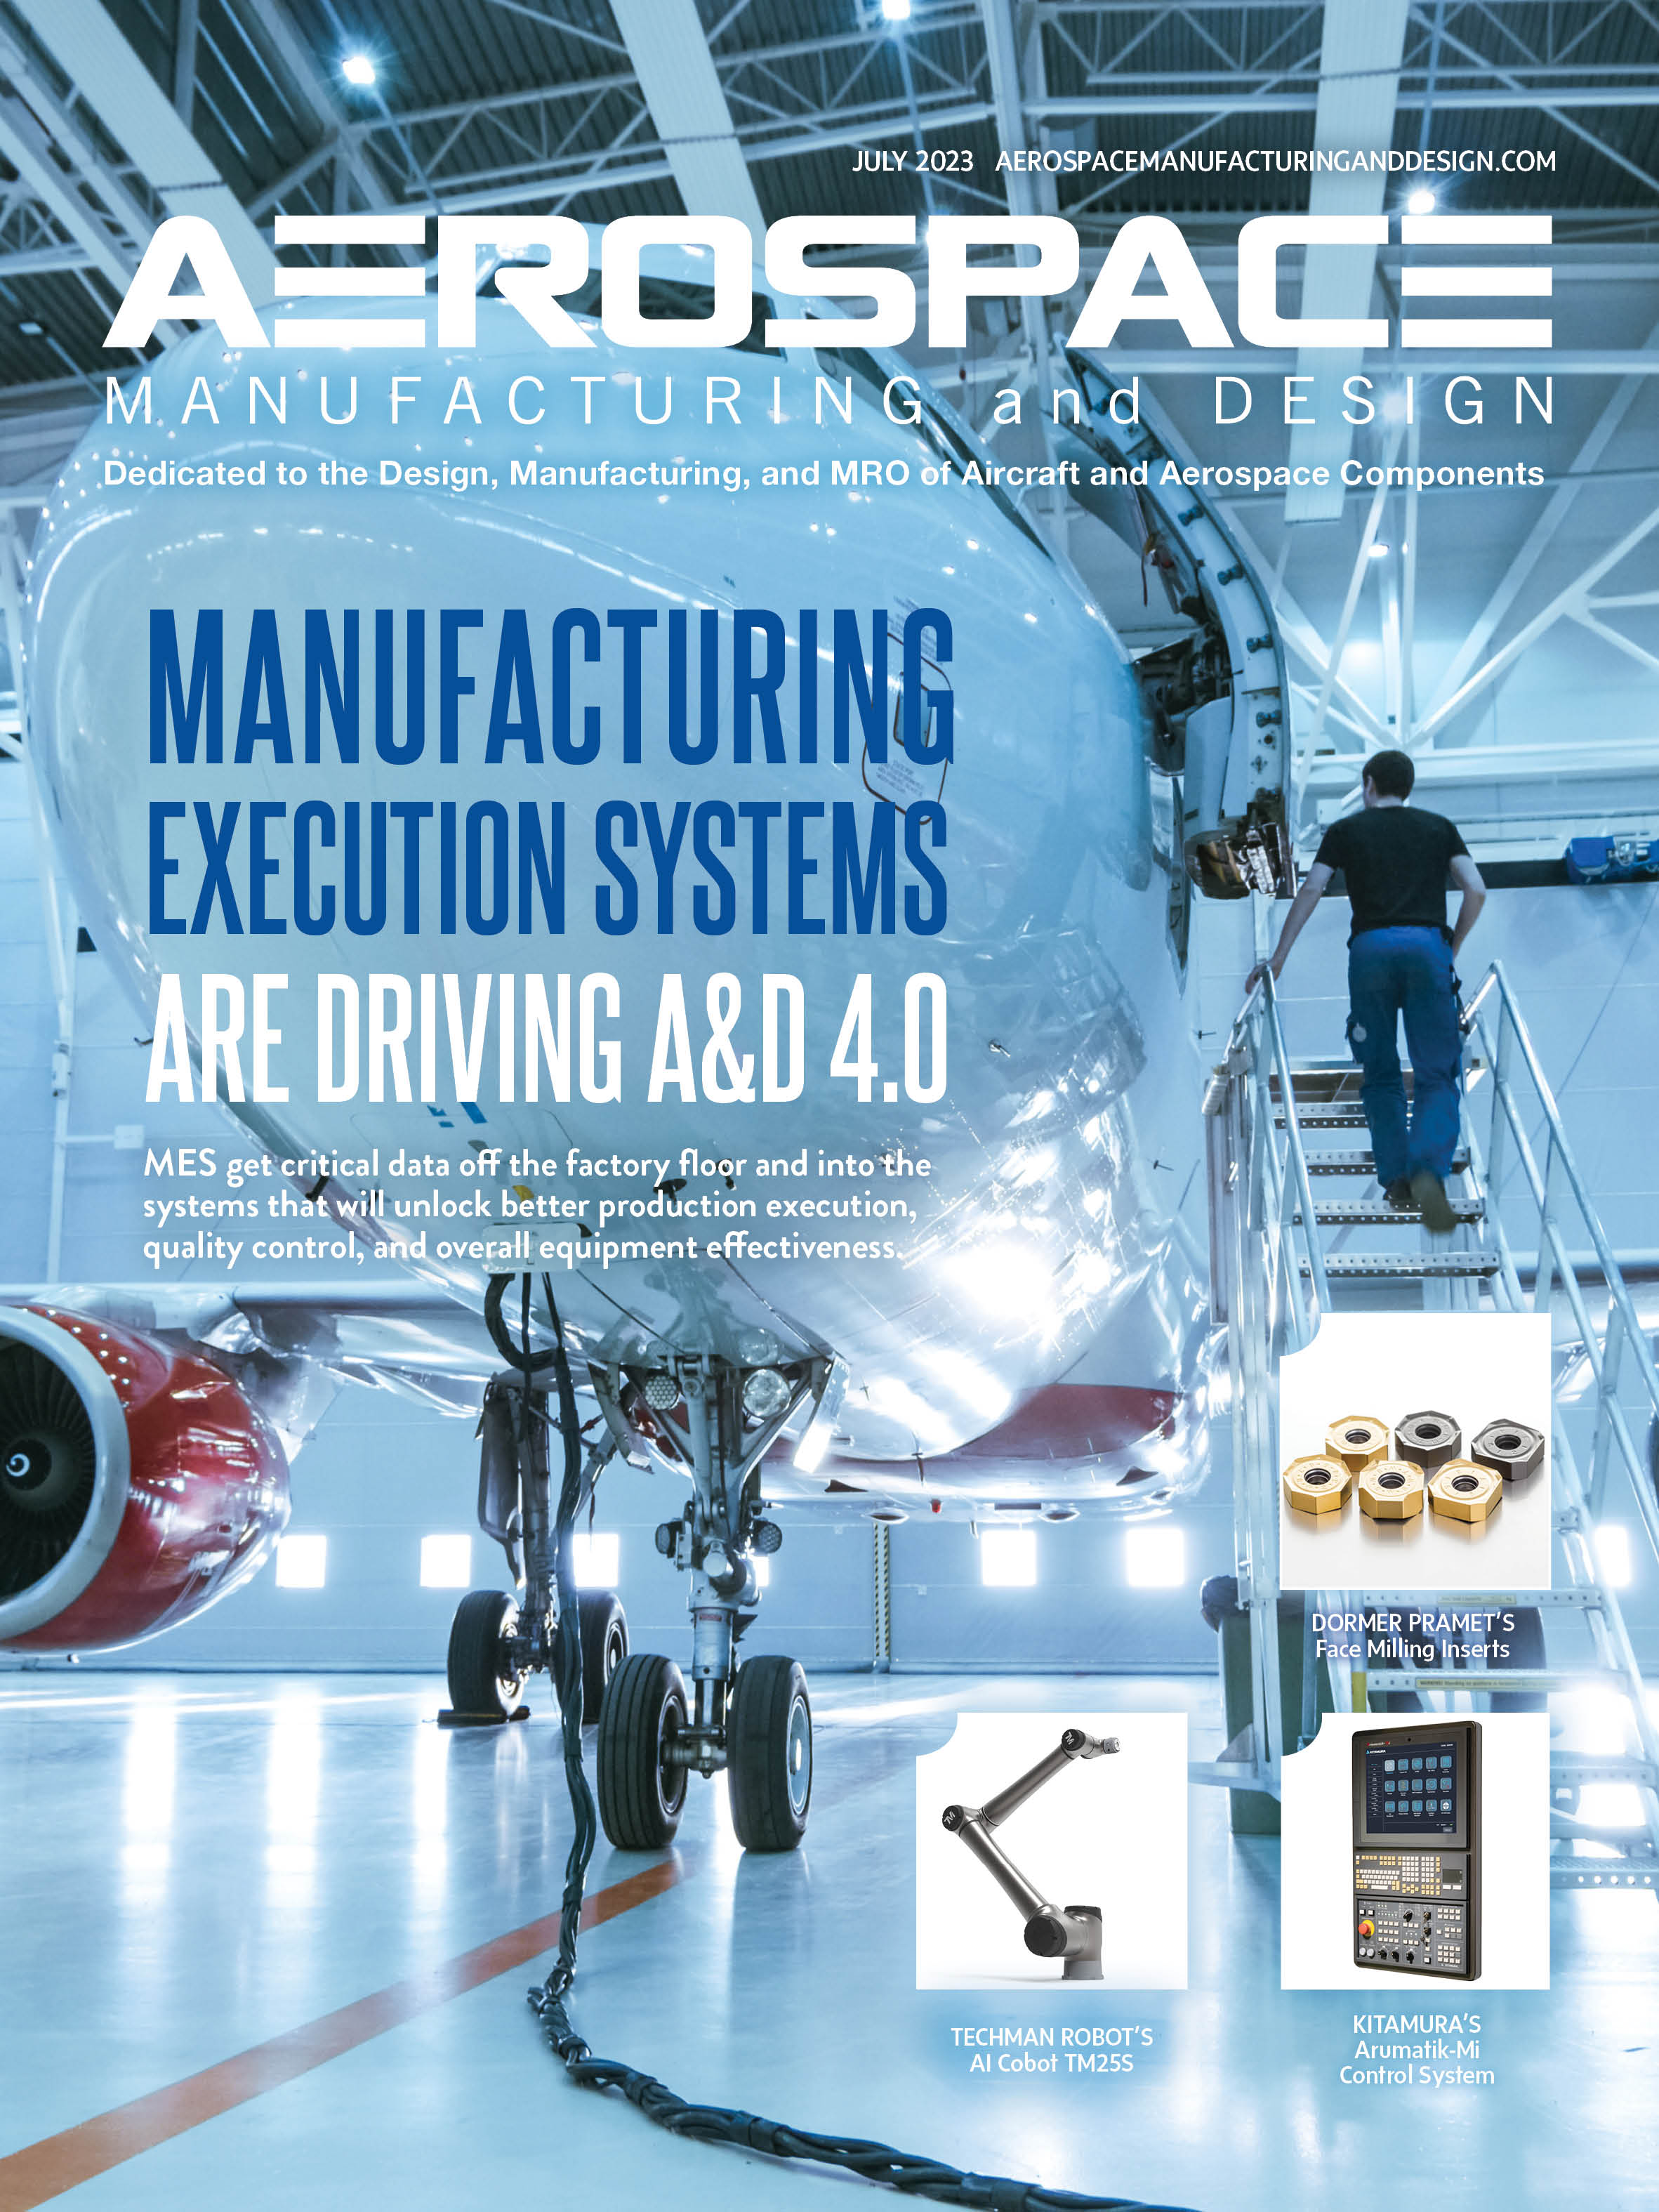 Latest products & solutions - Aerospace Manufacturing and Design